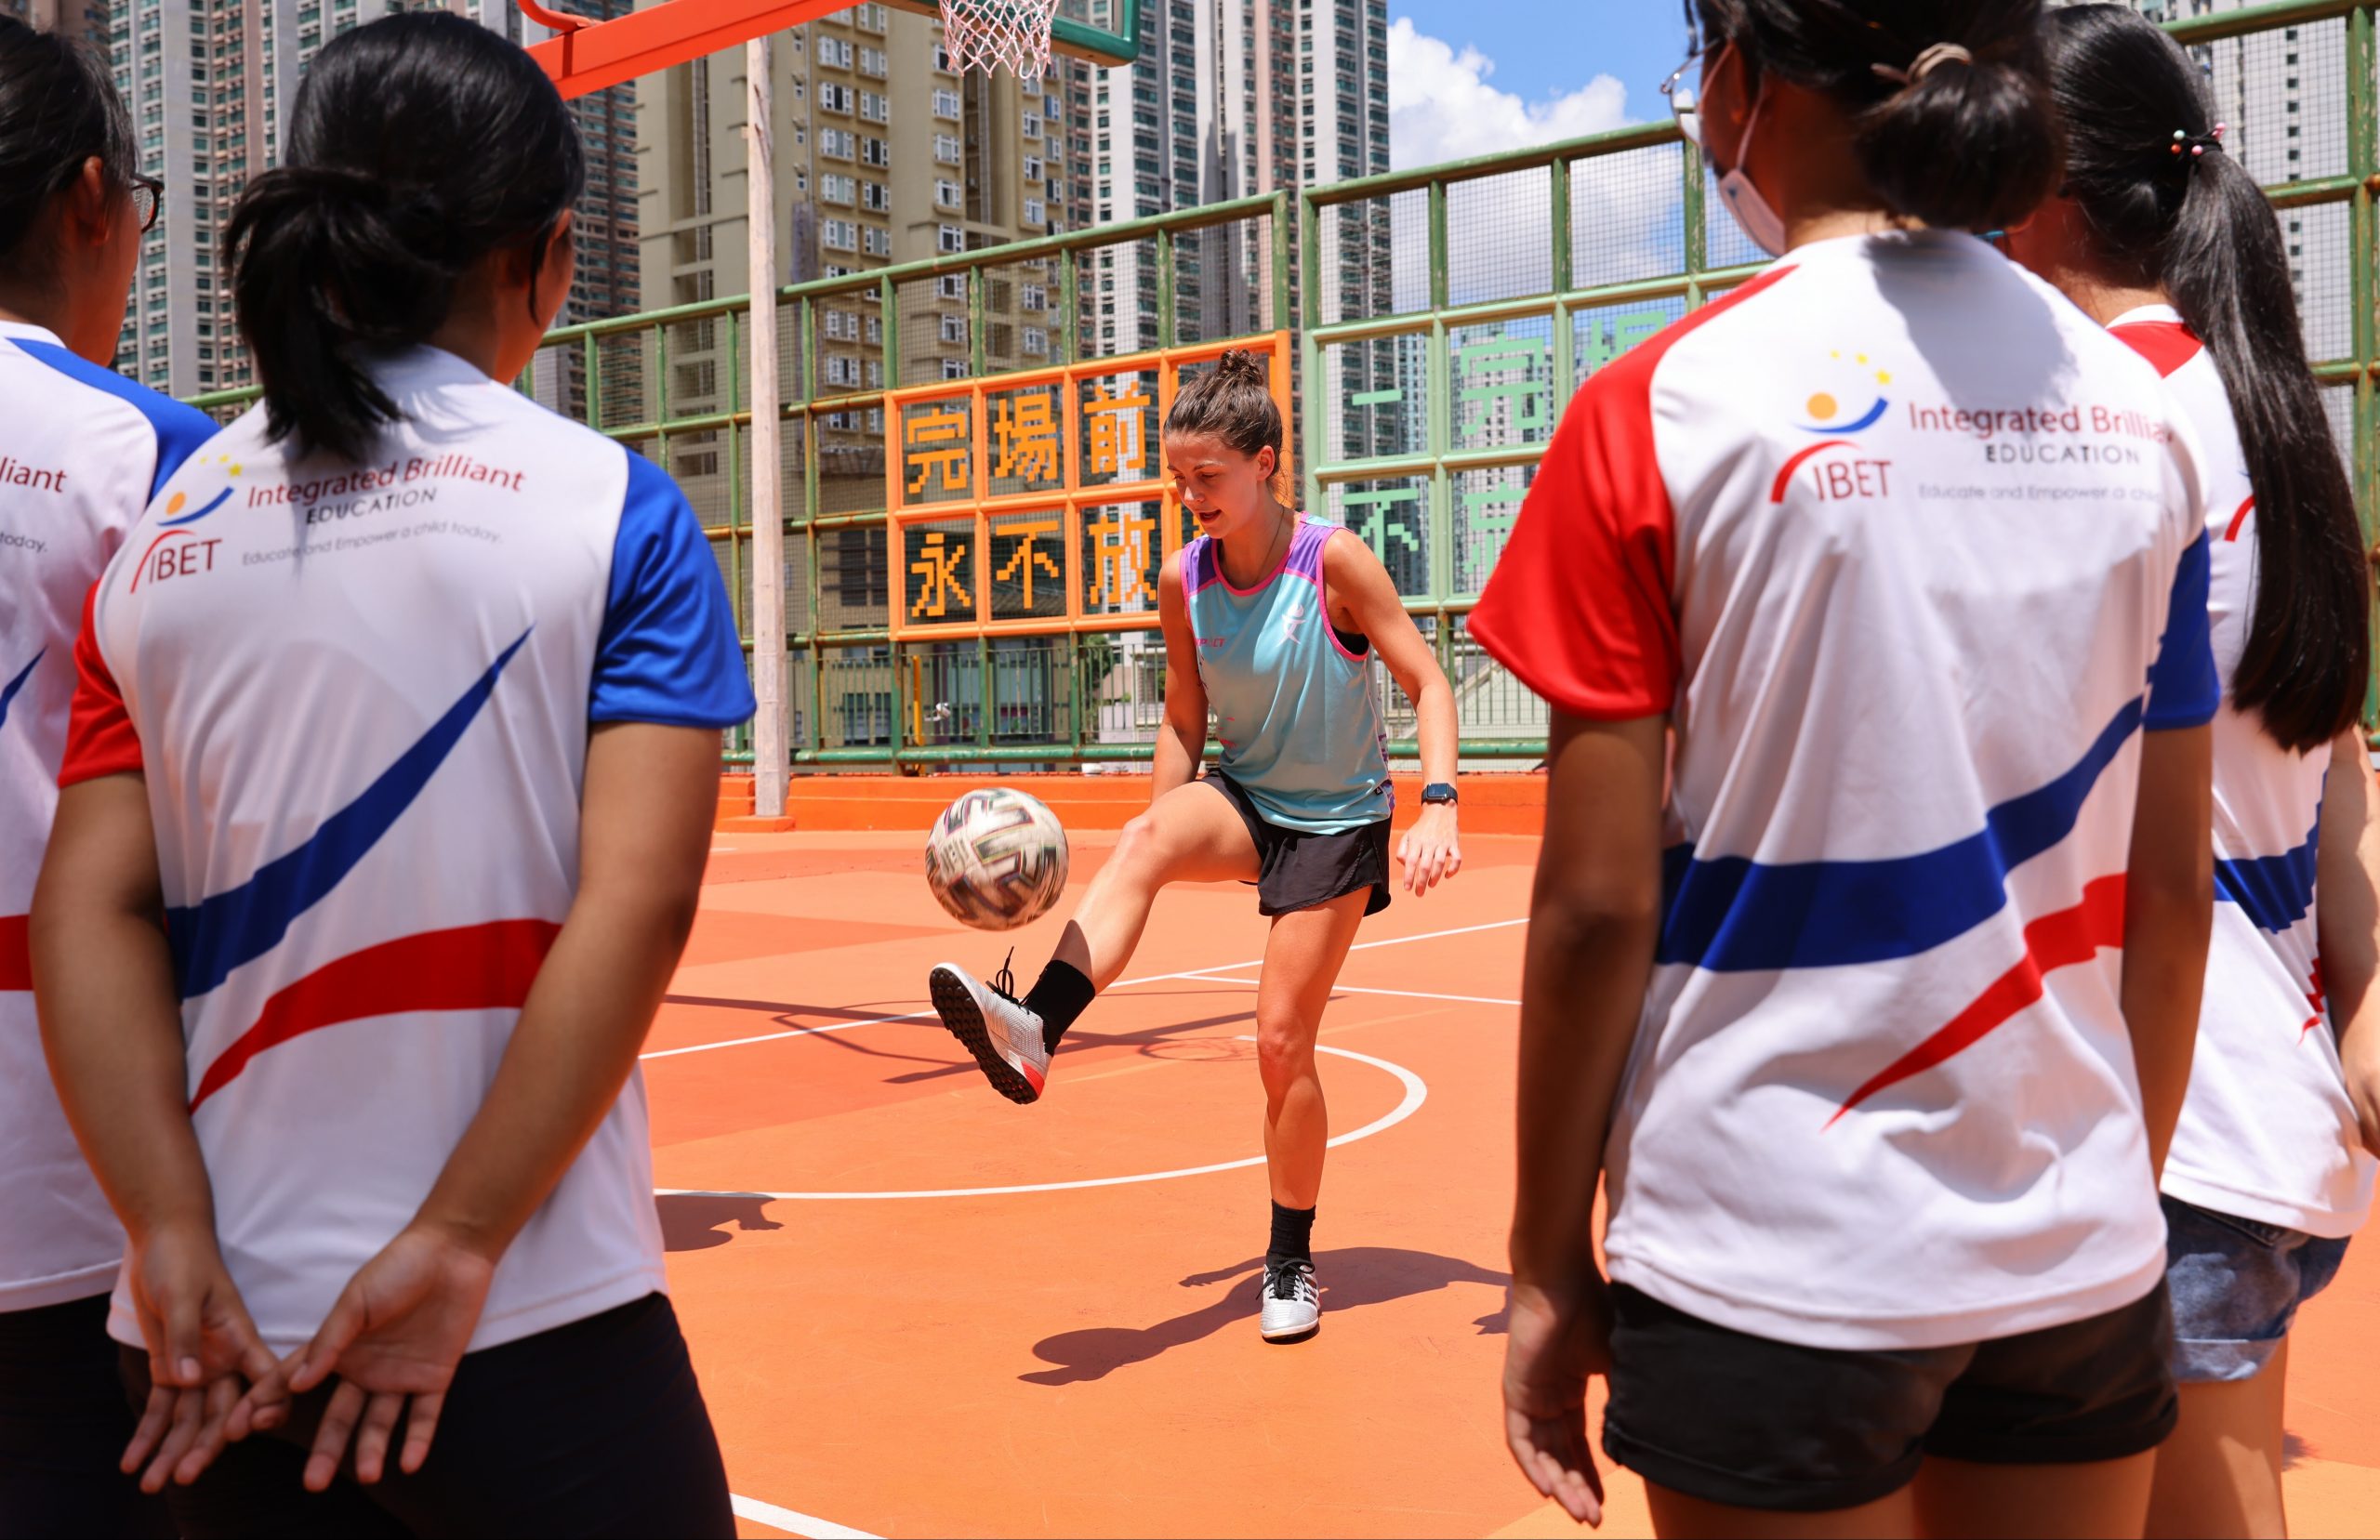 Scheme aims to capitalise on Hong Kong women’s Tokyo 2020 Olympics success to empower city’s youth